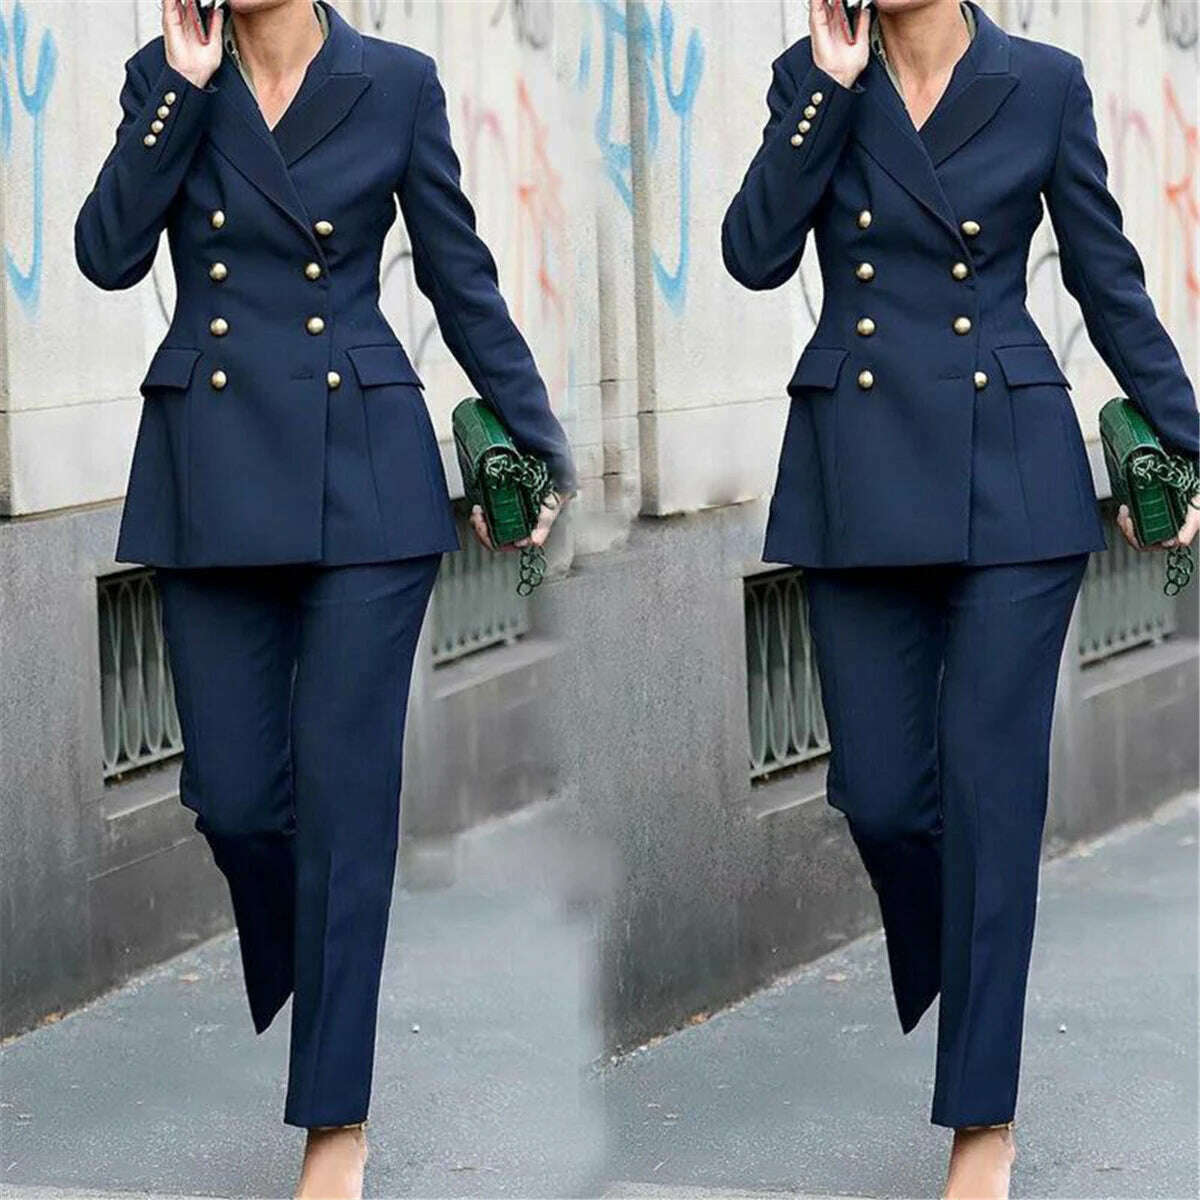 KIMLUD, Classic Navy Blue Women Suits Double Breasted Set 2 Pieces Peaked Lapel Blazer Pant Streetwear Outdoor Evening Dress Custom Made, Same as picture / XL (US10 or EU42), KIMLUD Womens Clothes